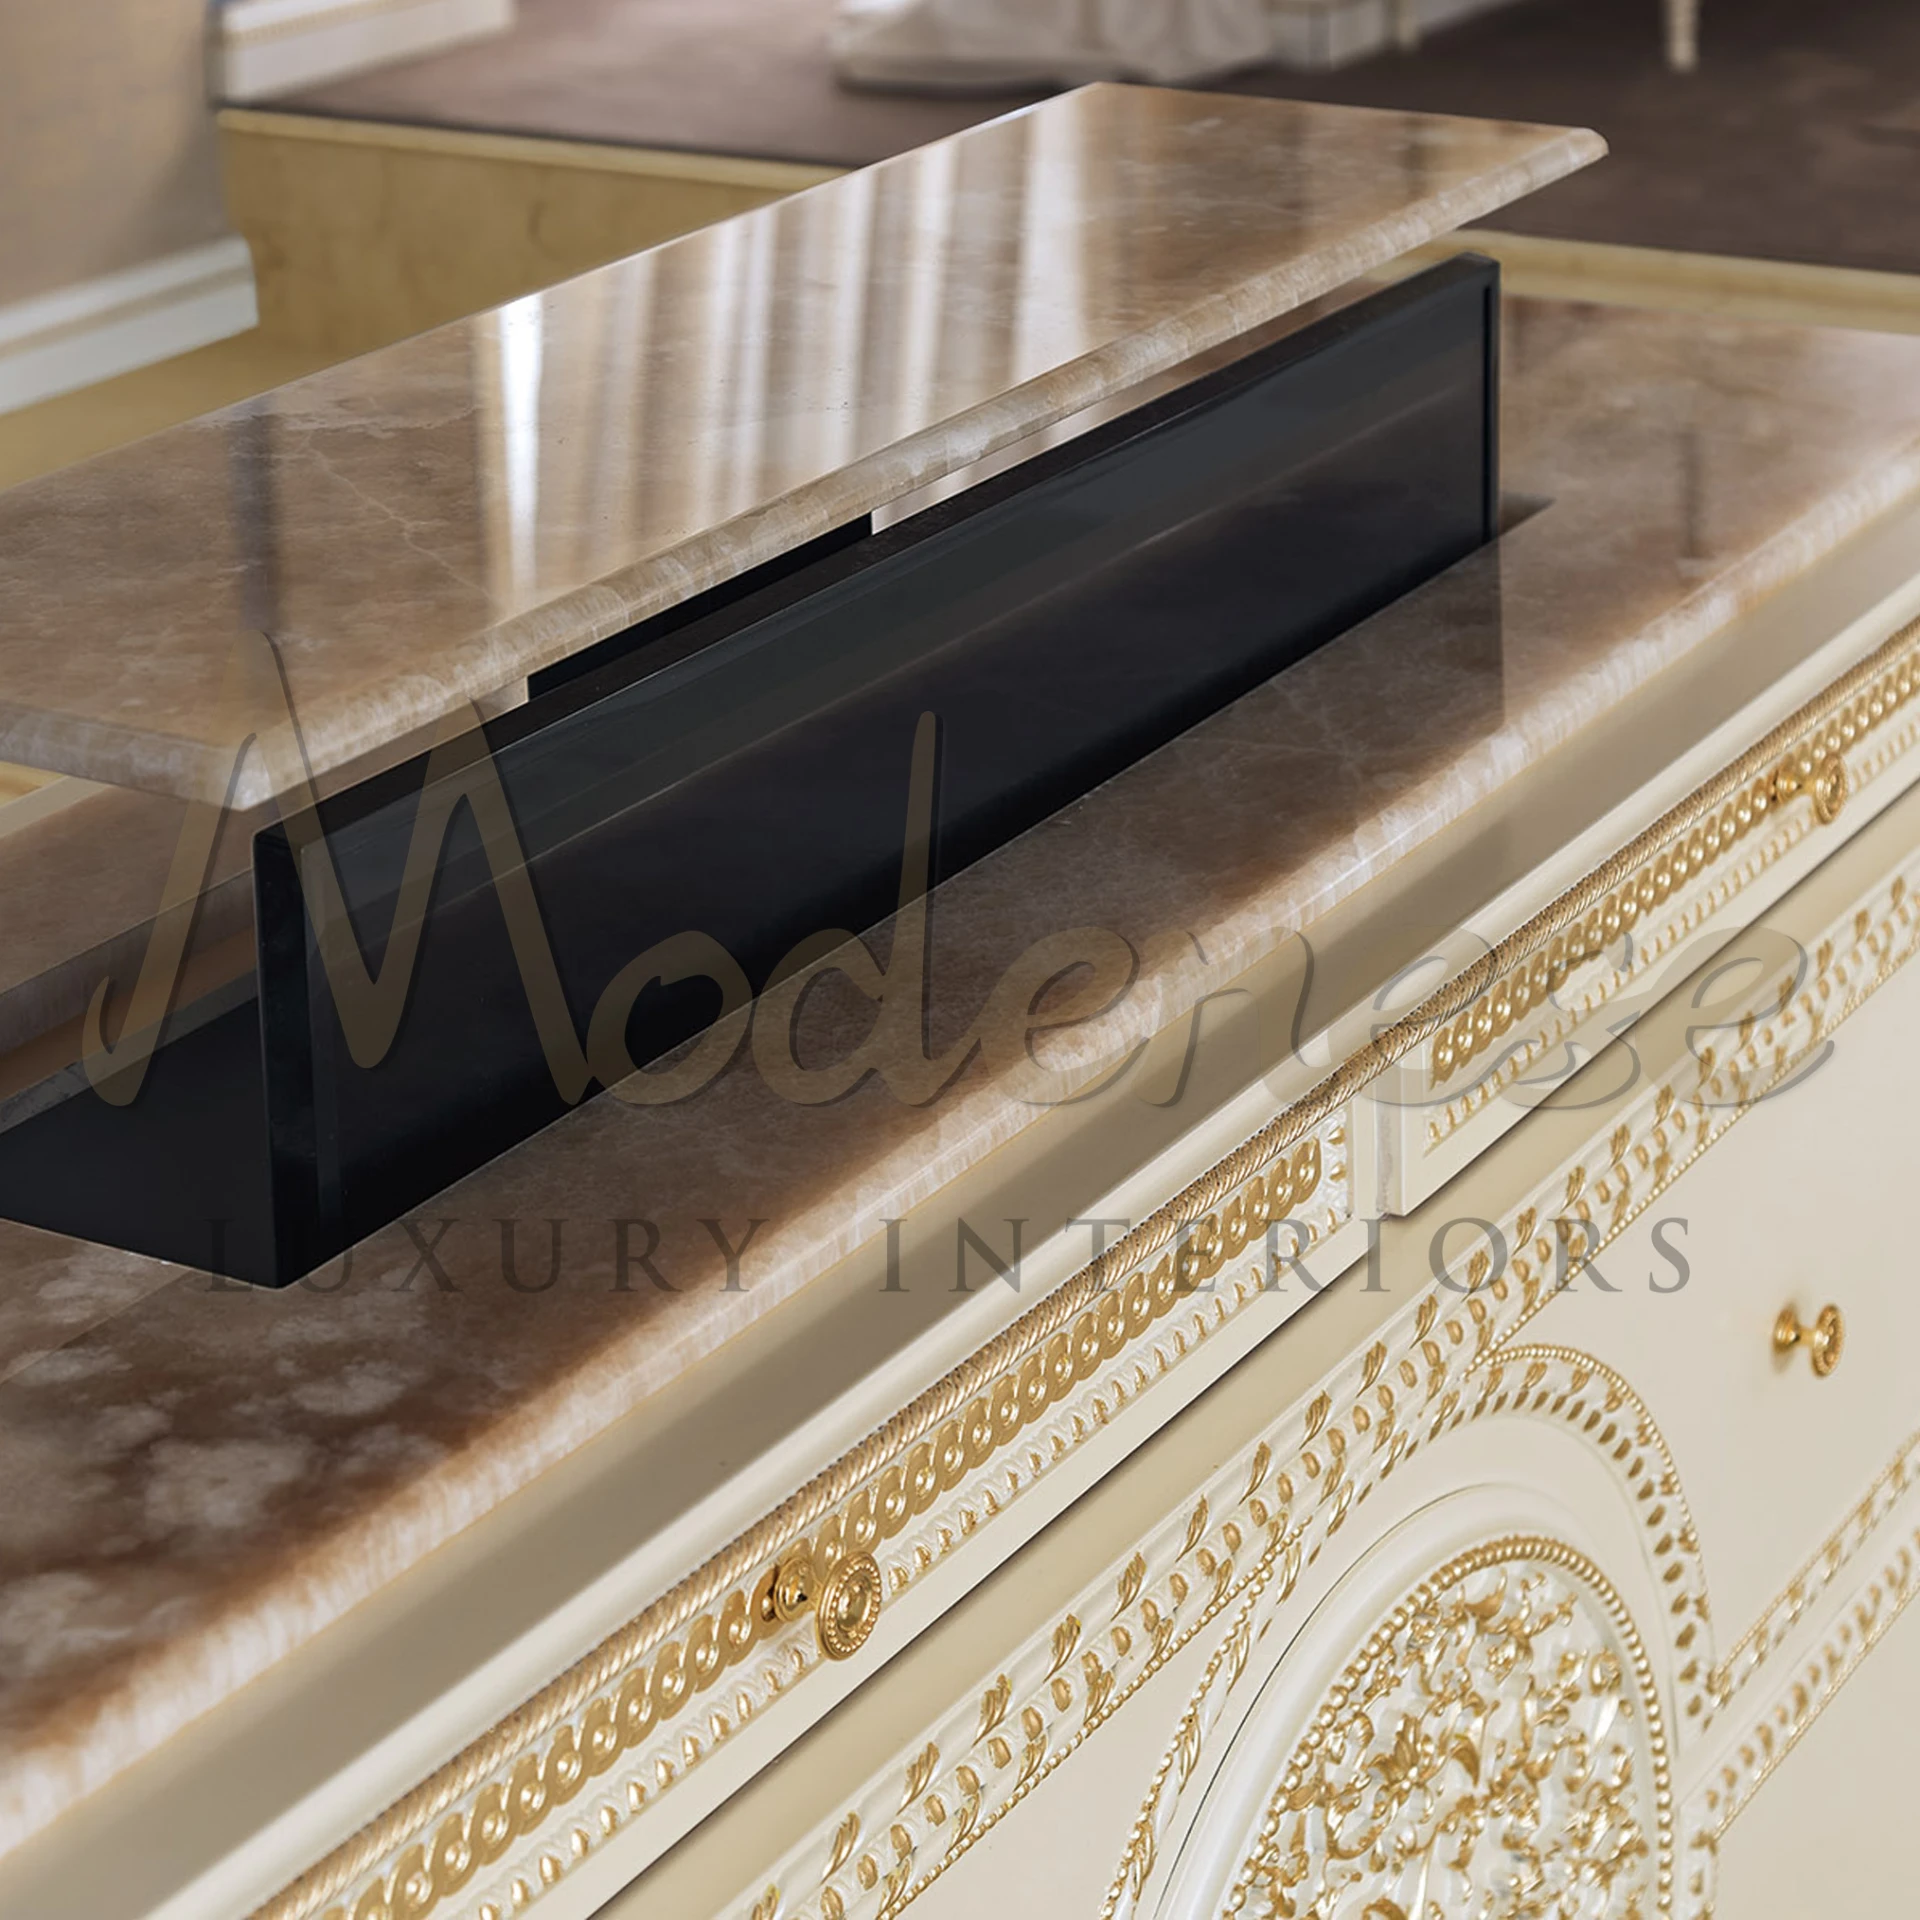 Elegant solid wood TV stand with unique mechanism, reflecting luxury interior design and Italian baroque style for premium spaces.
